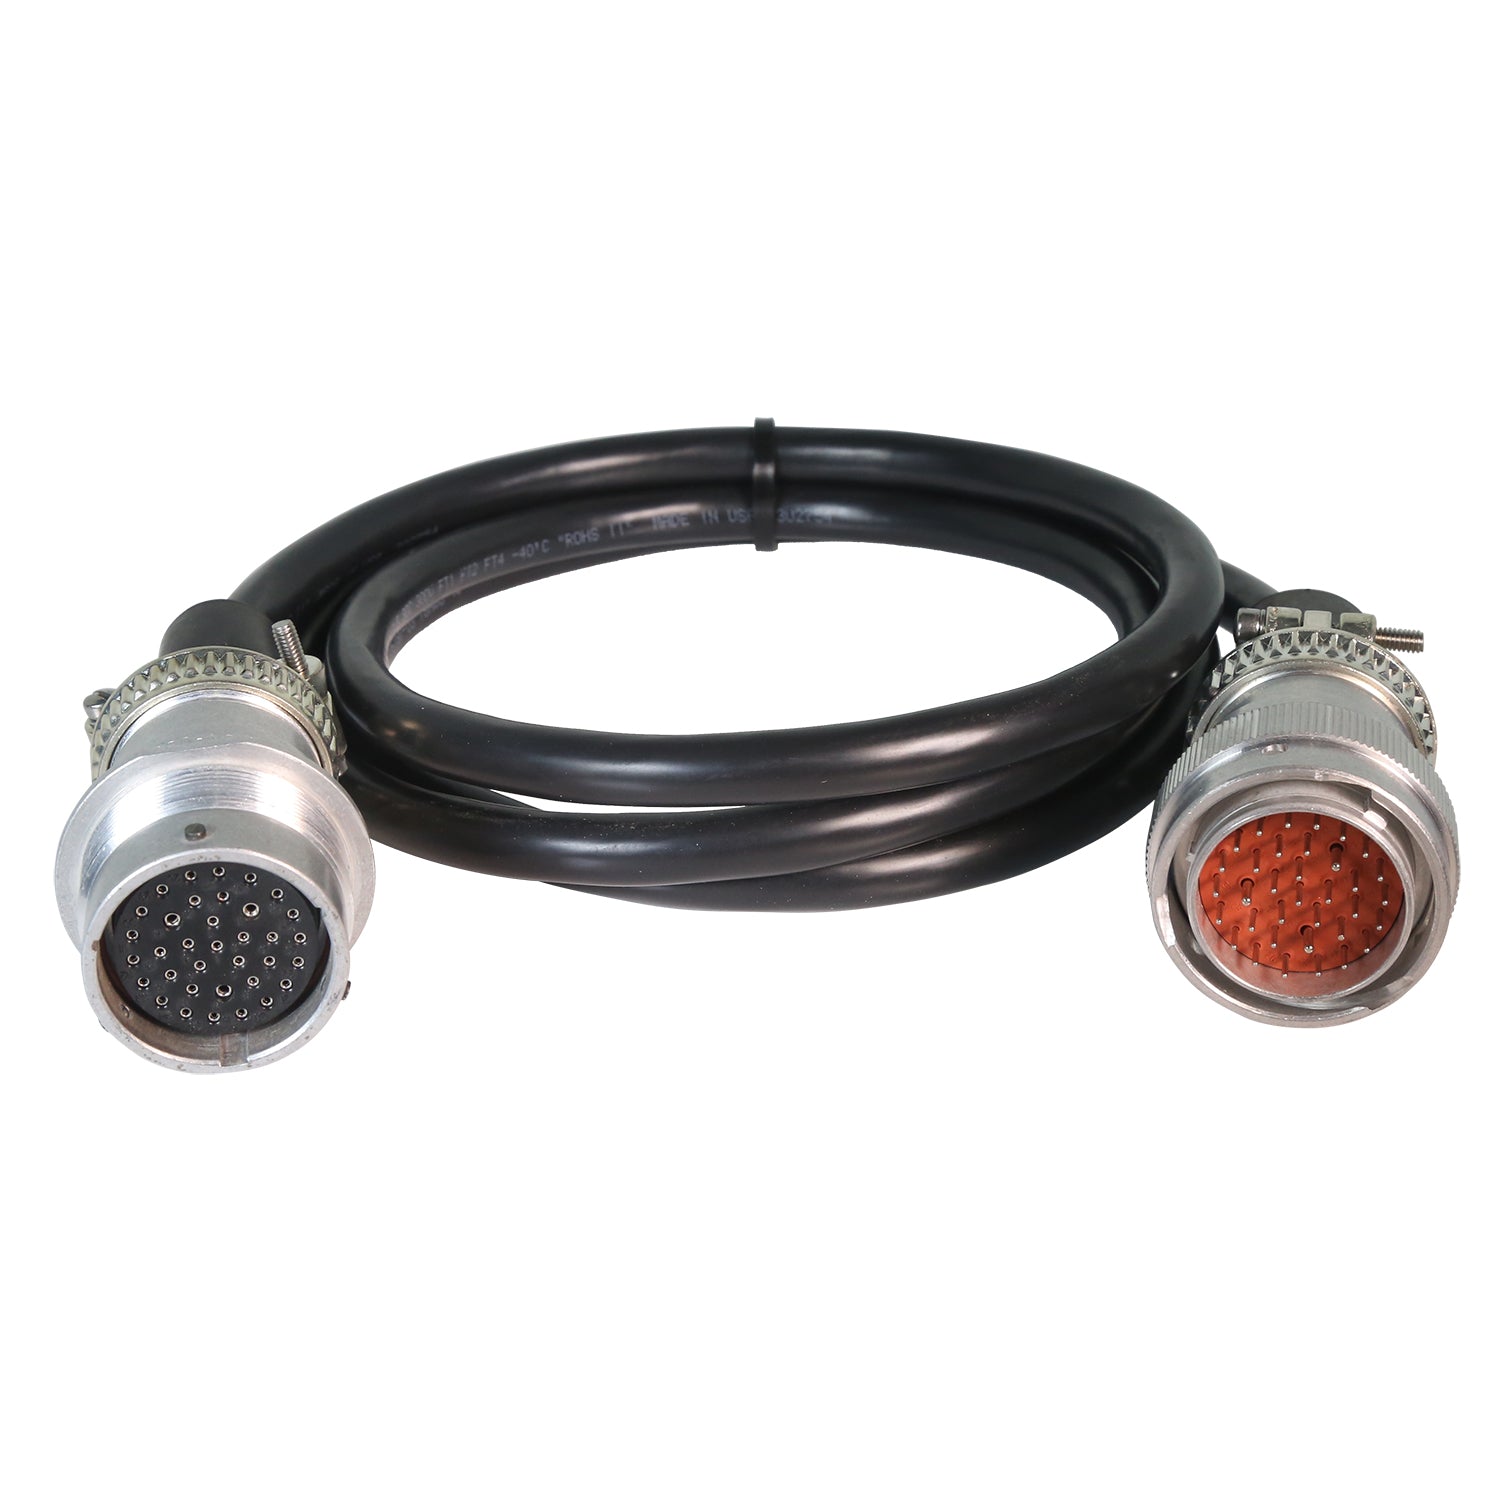 (07) 35 Pin Deutsch Extension Cable